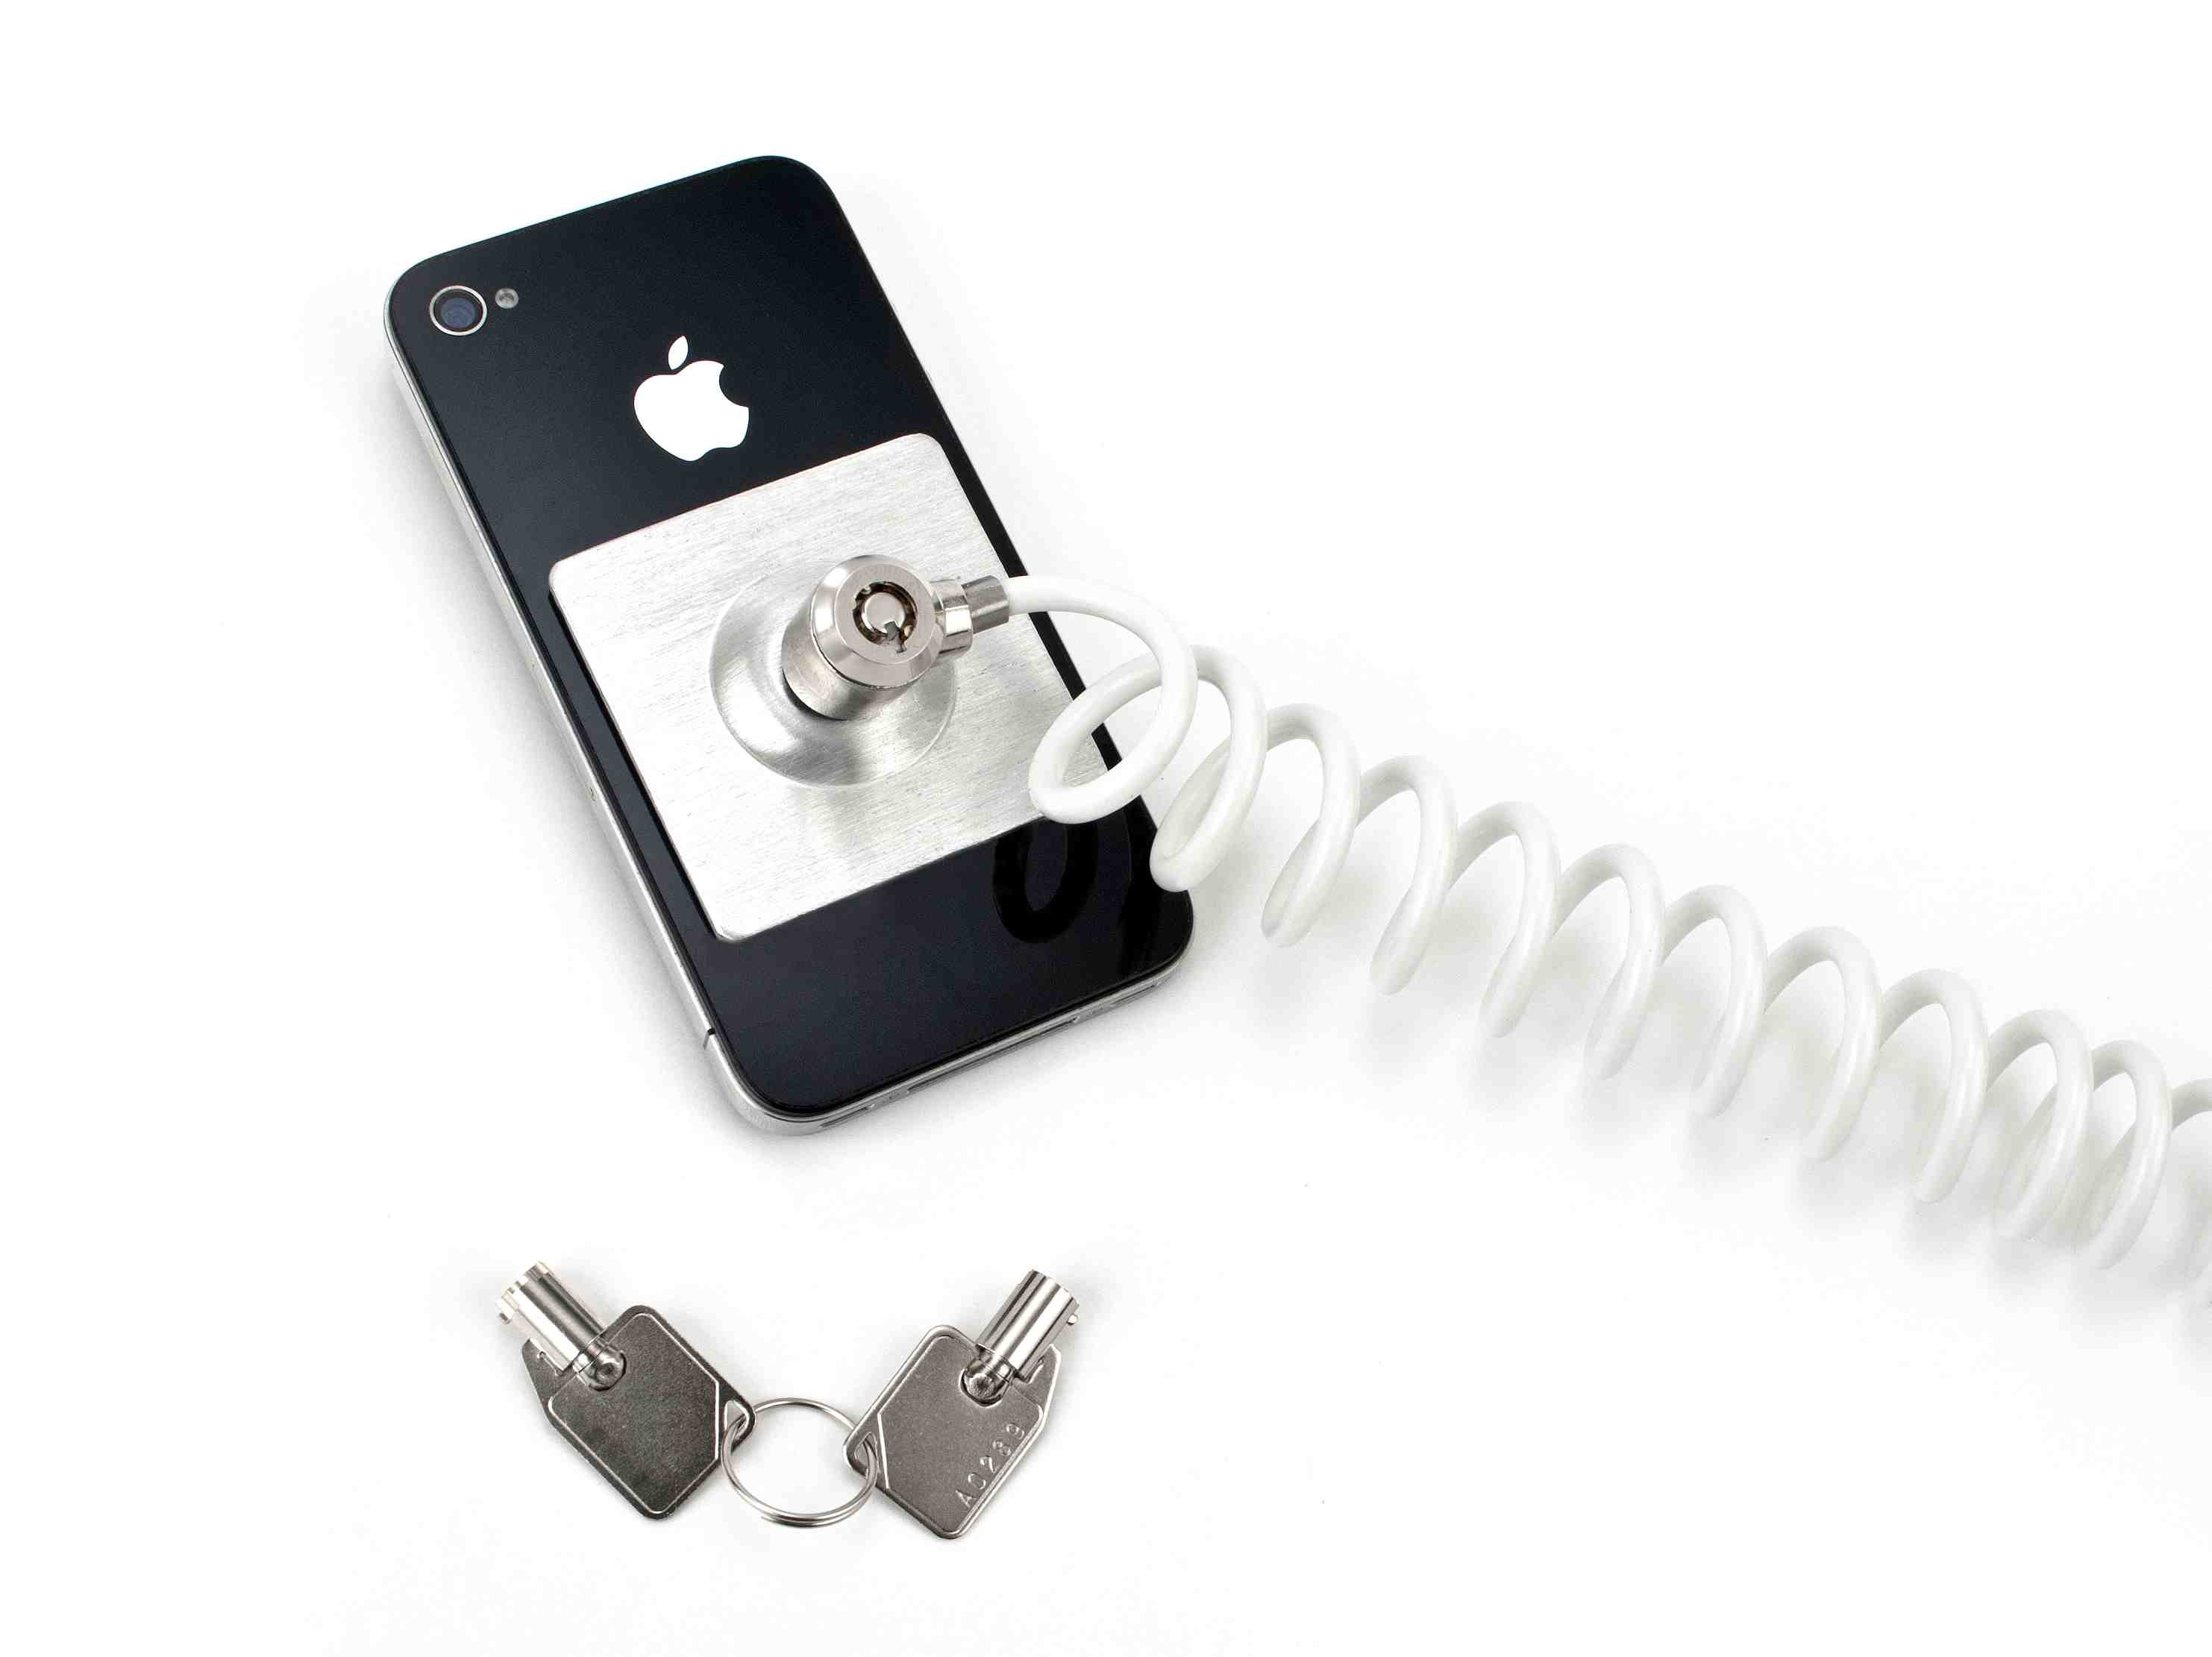 iPhone security tether security cable